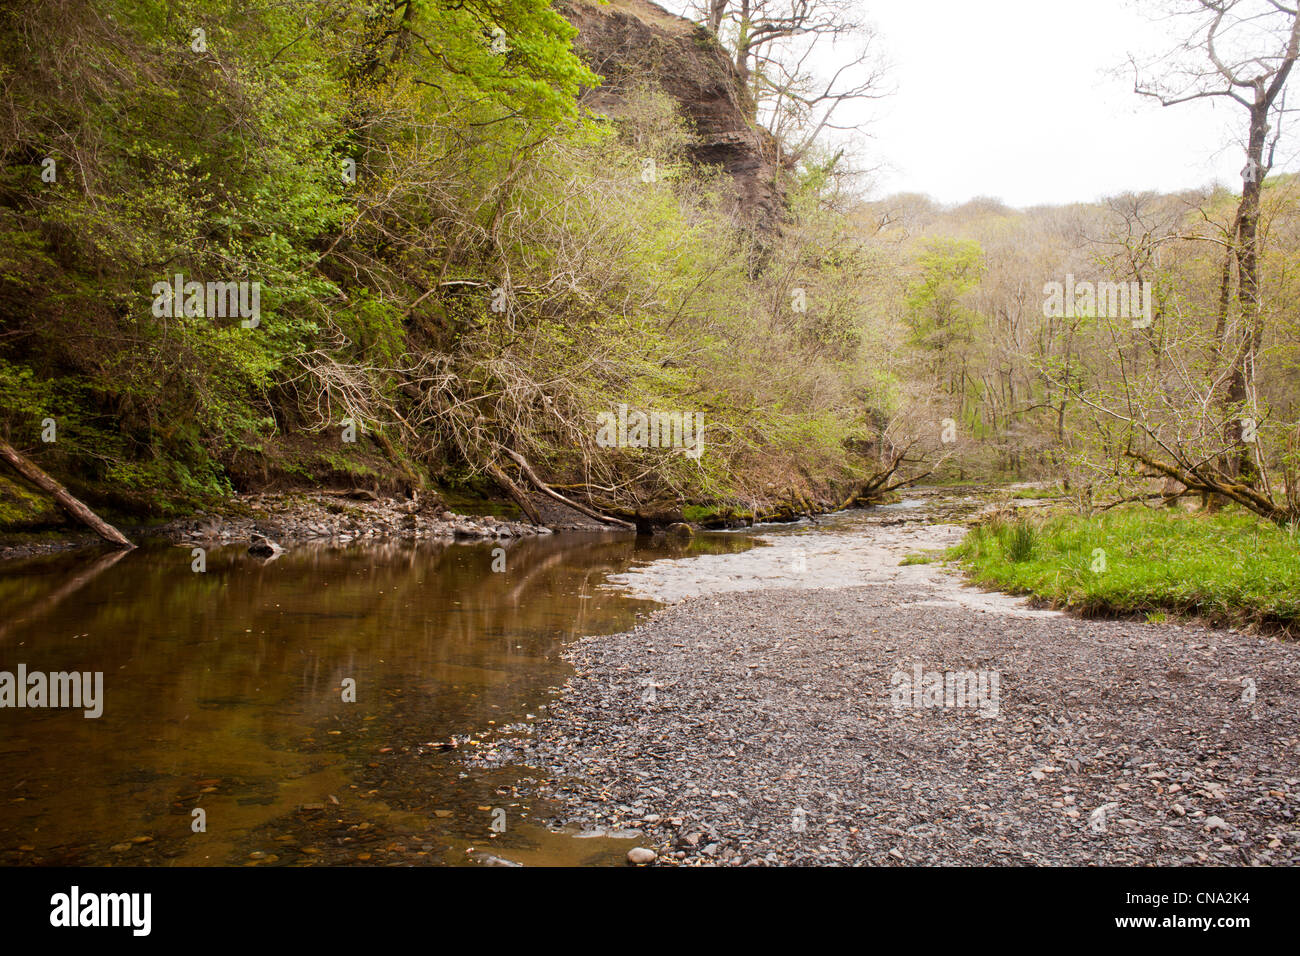 Waterfalls, mountain river and damp woodlands in valley at Ystradvelte in the Brecon Beacons, Wales, UK. Stock Photo